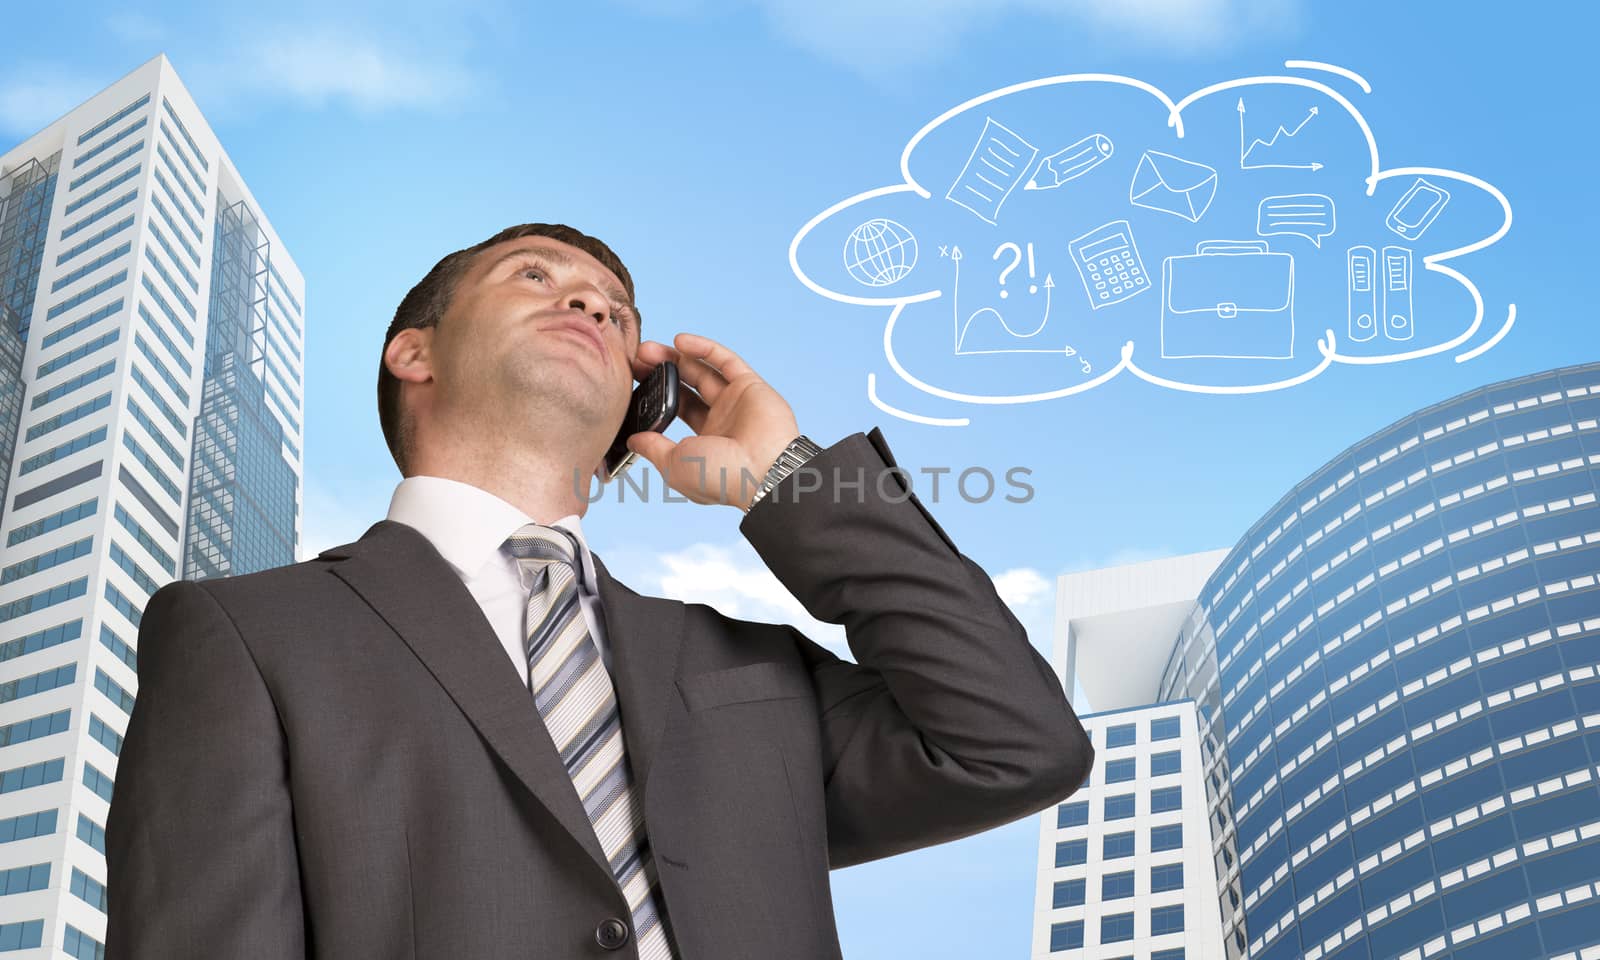 Businessman talking on the phone. Skyscrapers and cloud with business sketches in background